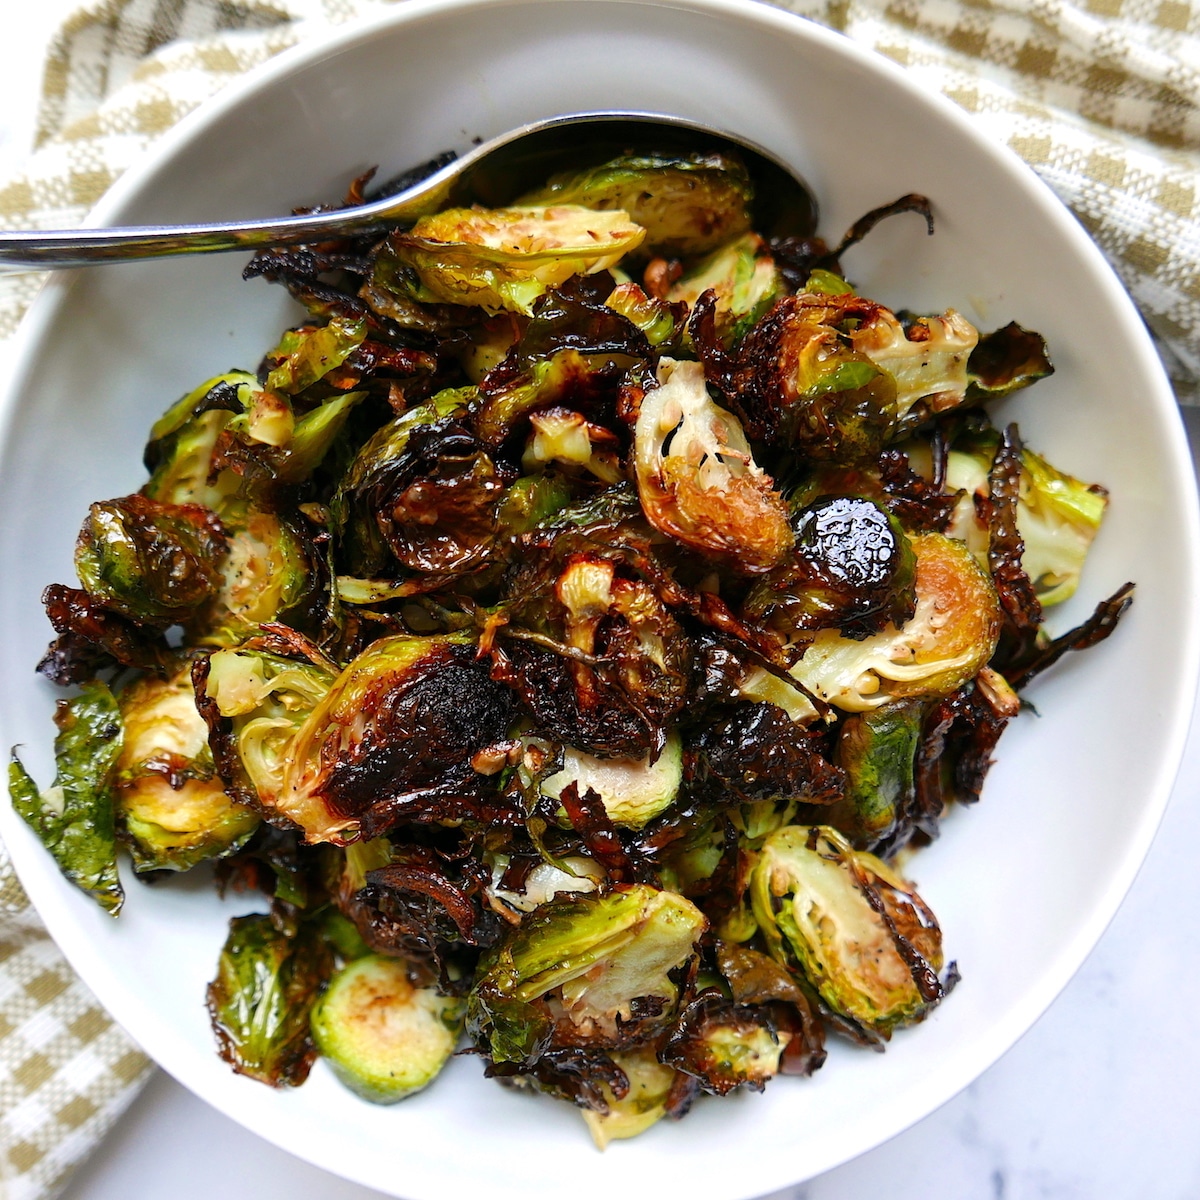 Roasted brussels sprouts in a white bowl with spoon and resting on a napkin.